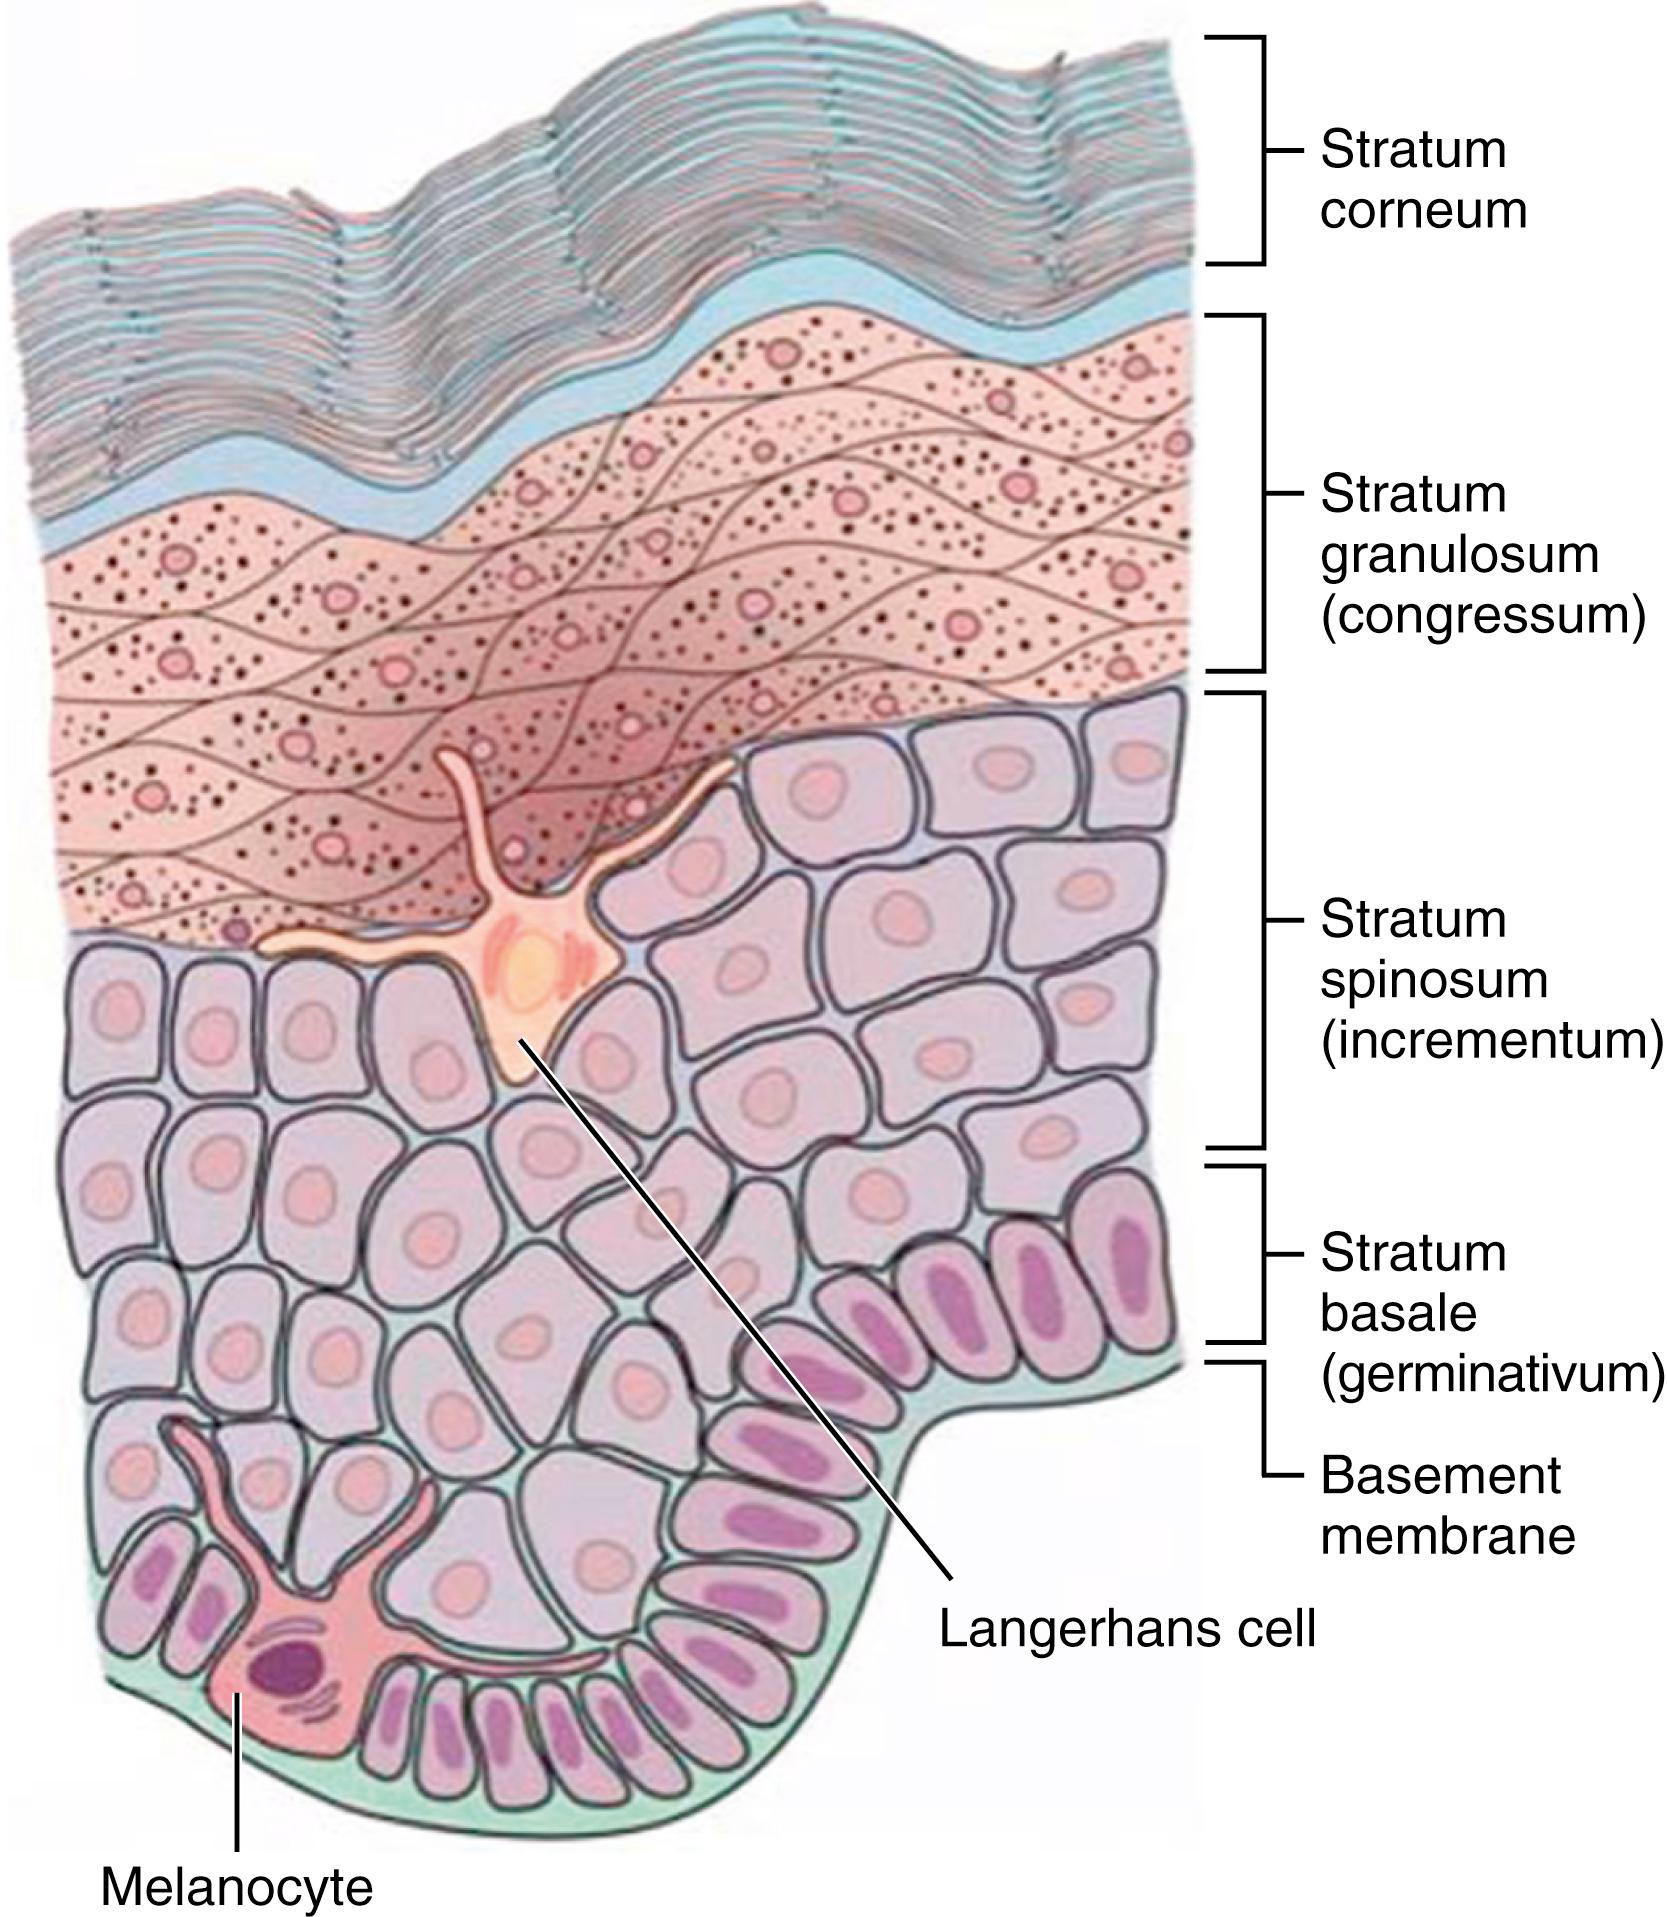 Fig. 44.1, Organization of human epidermis. The interfollicular epidermis is traditionally considered to be a tetratomic identity incorporating four separate structural and functional epidermal strata. In humans the epidermis between the hair follicles is much thicker than in furred animals. The epidermis is composed primarily of keratinocytes but includes other epidermal cells such as melanocytes, Langerhans cells, and Merkel cells (latter not shown). The outermost stratum, the stratum corneum, incorporates the transition from living, nucleated keratinocytes to terminally differentiated corneocytes. This diagram is schematic only and does not illustrate the important intercellular connections (desmosomes) converting single cells into integrated membrane structures.